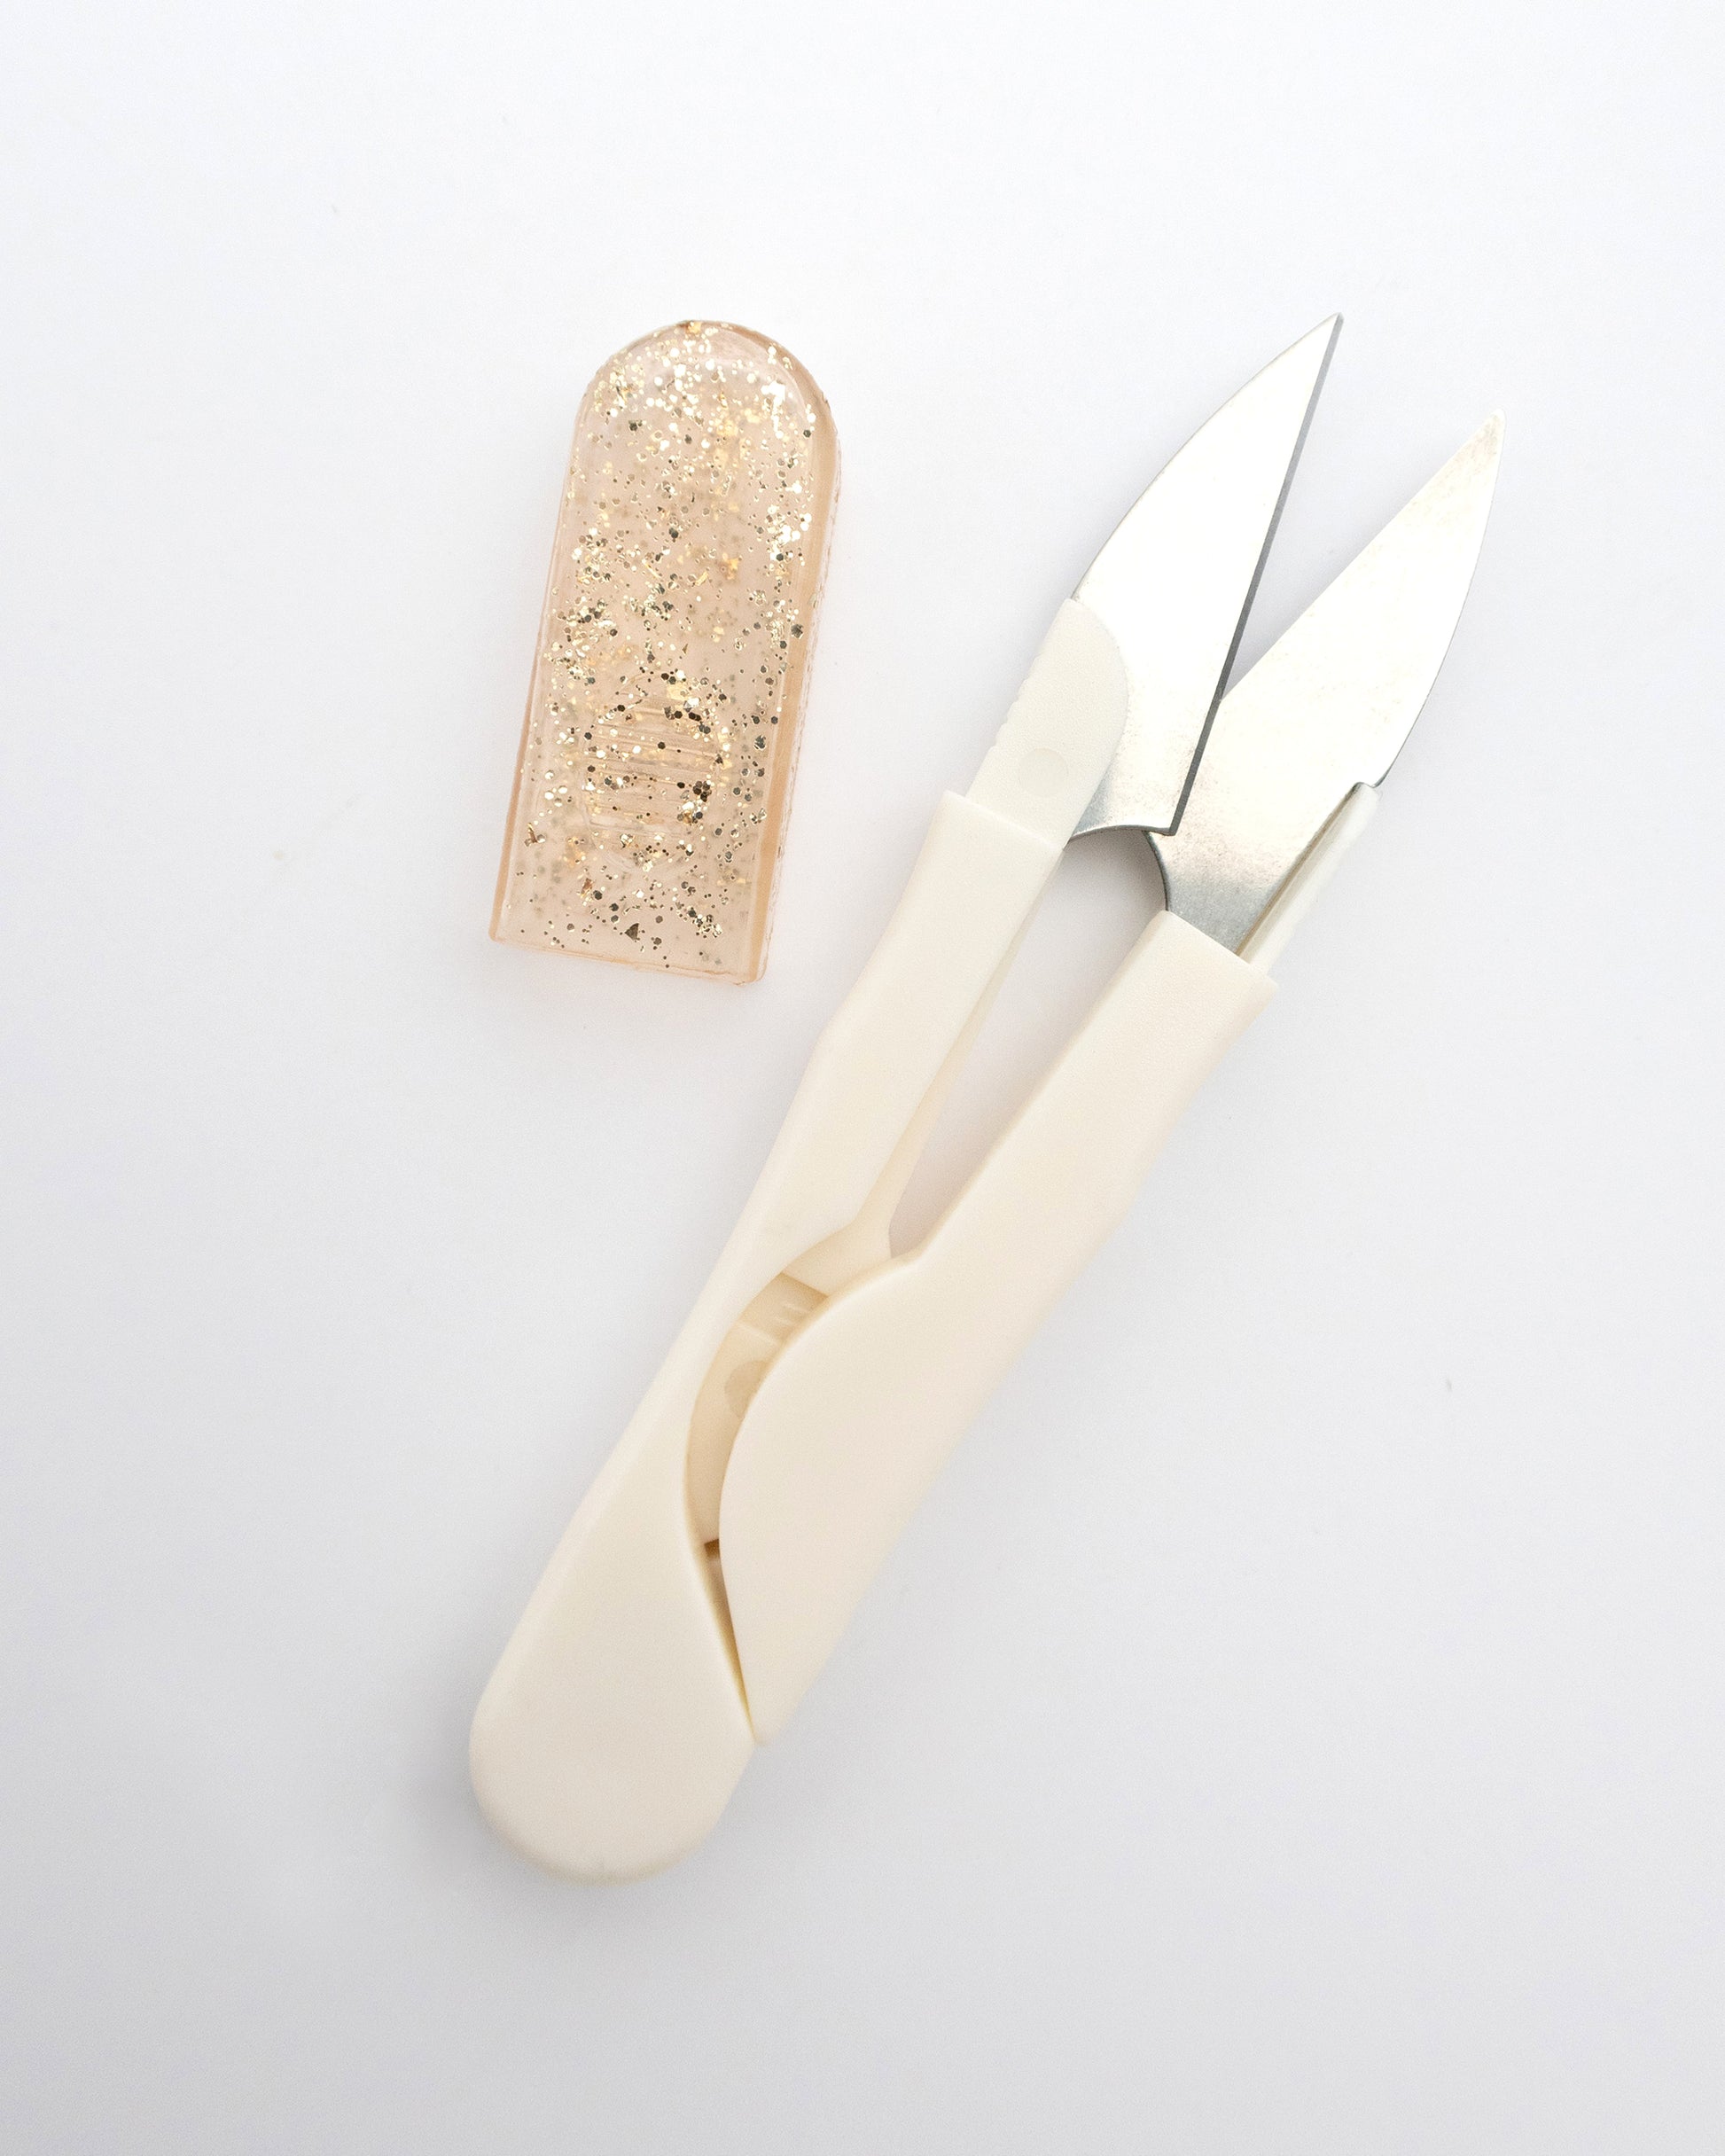 Embroidery & Sewing Snips with Case, Gold and Cream